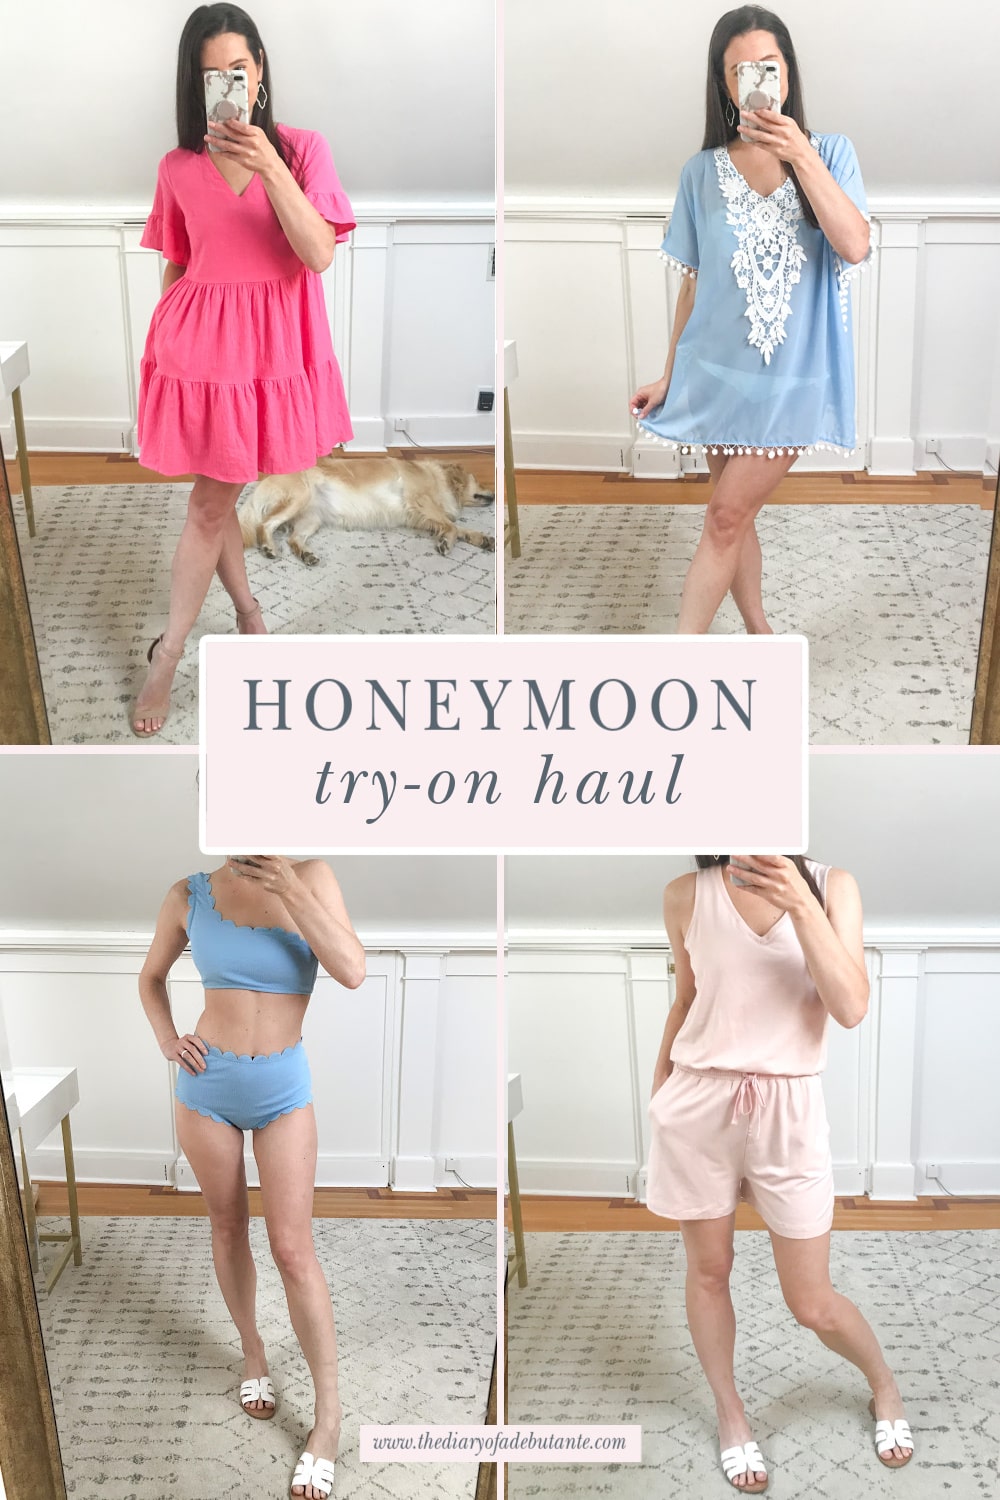 Amazon honeymoon try-on haul from affordable fashion blogger Stephanie Ziajka on Diary of a Debutante